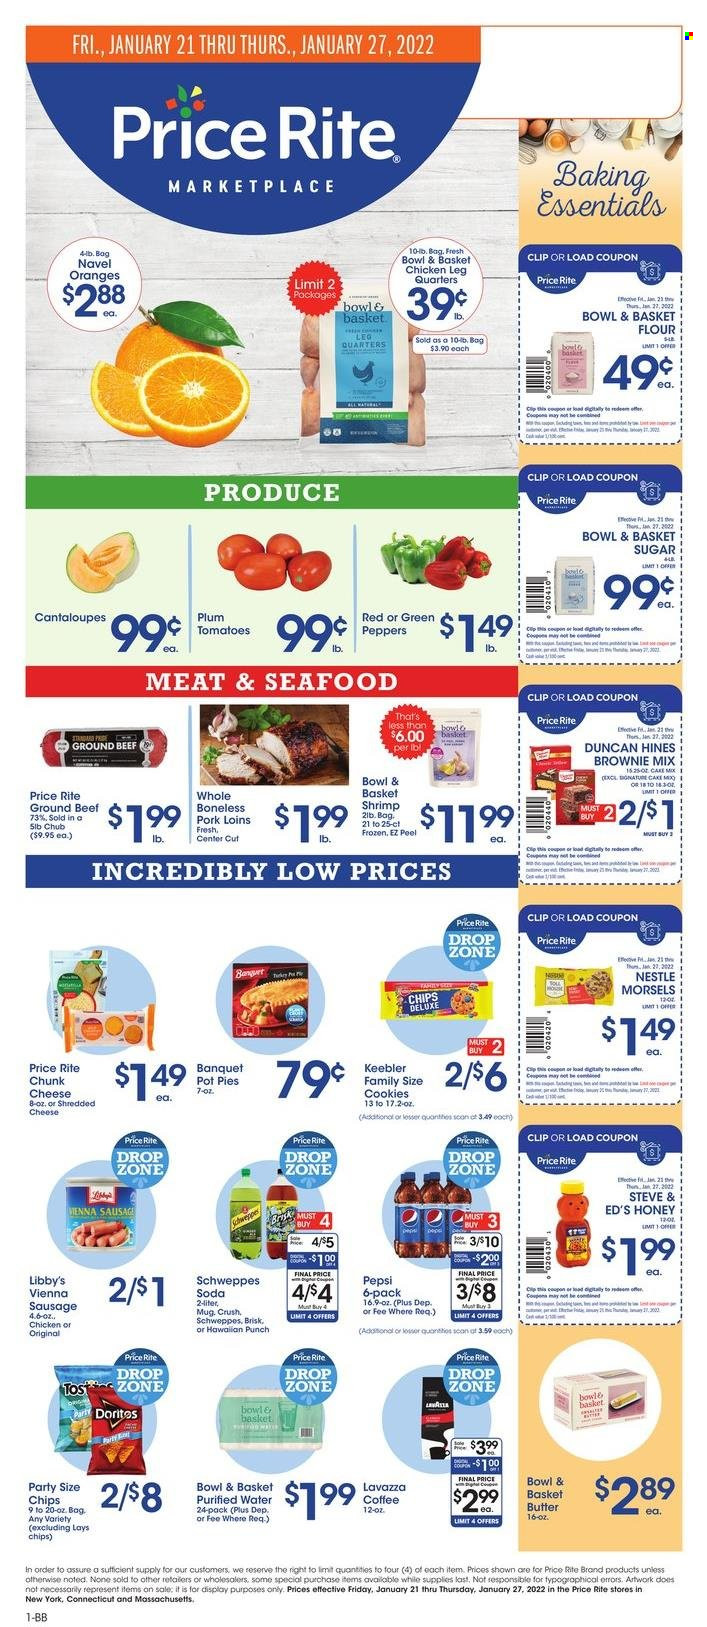 thumbnail - Price Rite Flyer - 01/21/2022 - 01/27/2022 - Sales products - cake, Bowl & Basket, pot pie, brownie mix, cantaloupe, tomatoes, peppers, oranges, seafood, shrimps, sausage, shredded cheese, chunk cheese, butter, cookies, Nestlé, Keebler, Doritos, Lay’s, flour, sugar, honey, Schweppes, Pepsi, soda, purified water, coffee, Lavazza, punch, chicken legs, beef meat, ground beef, navel oranges. Page 1.